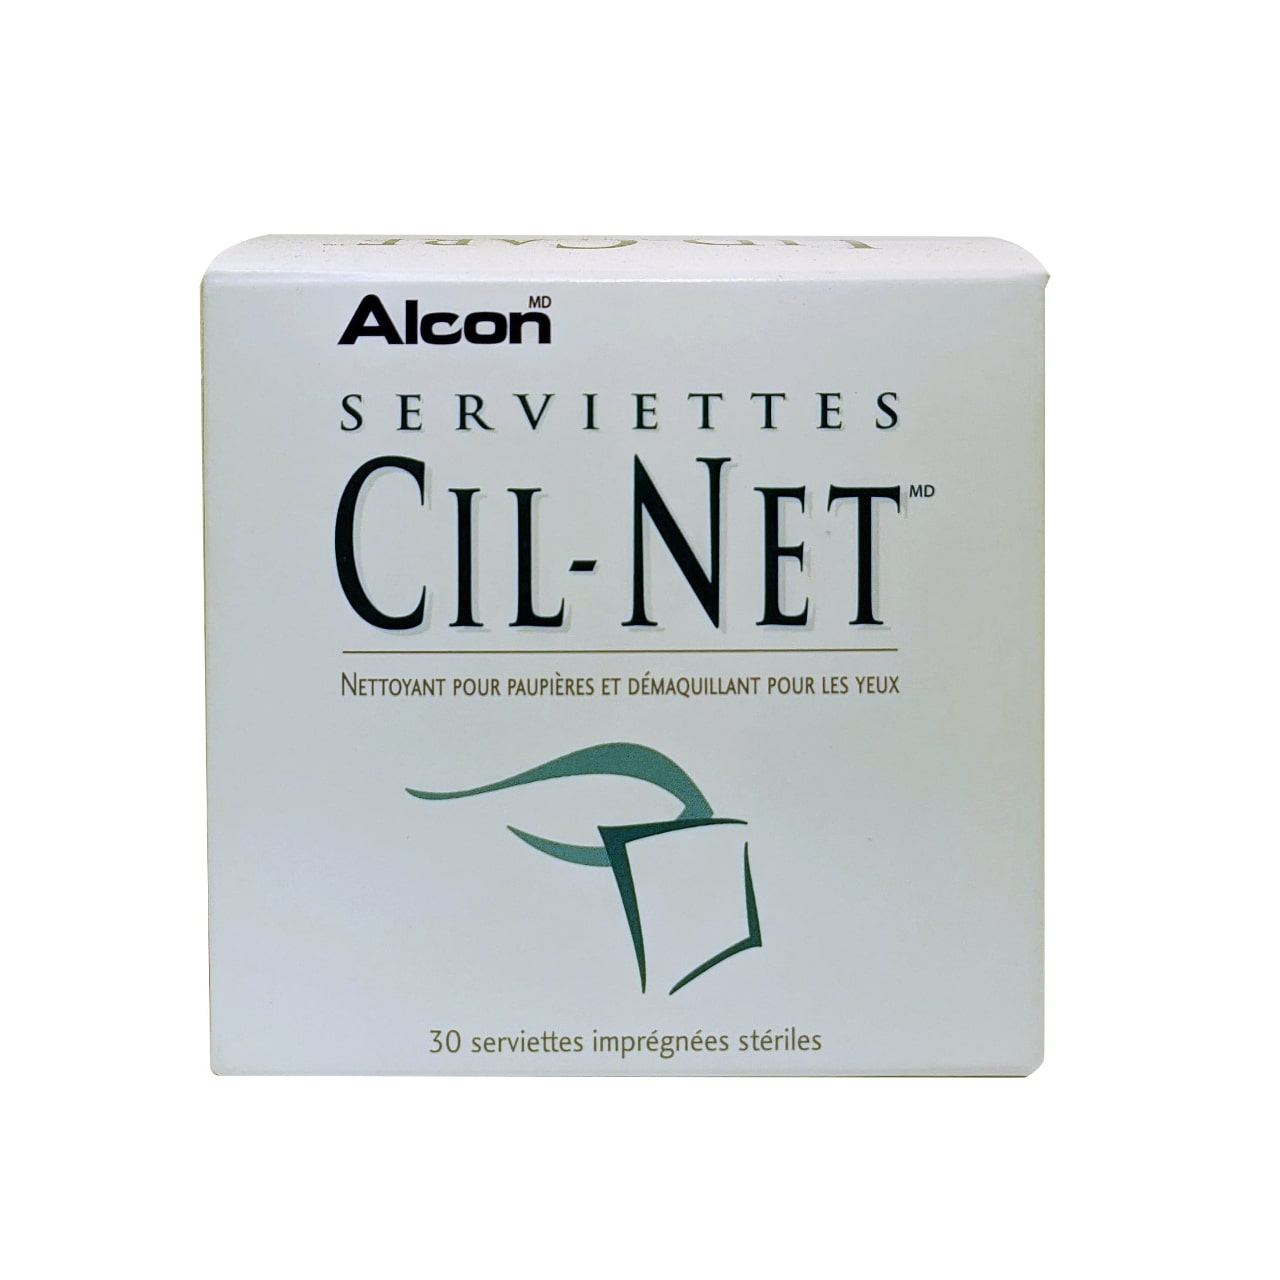 French package for Alcon Lid-Care Towelettes 